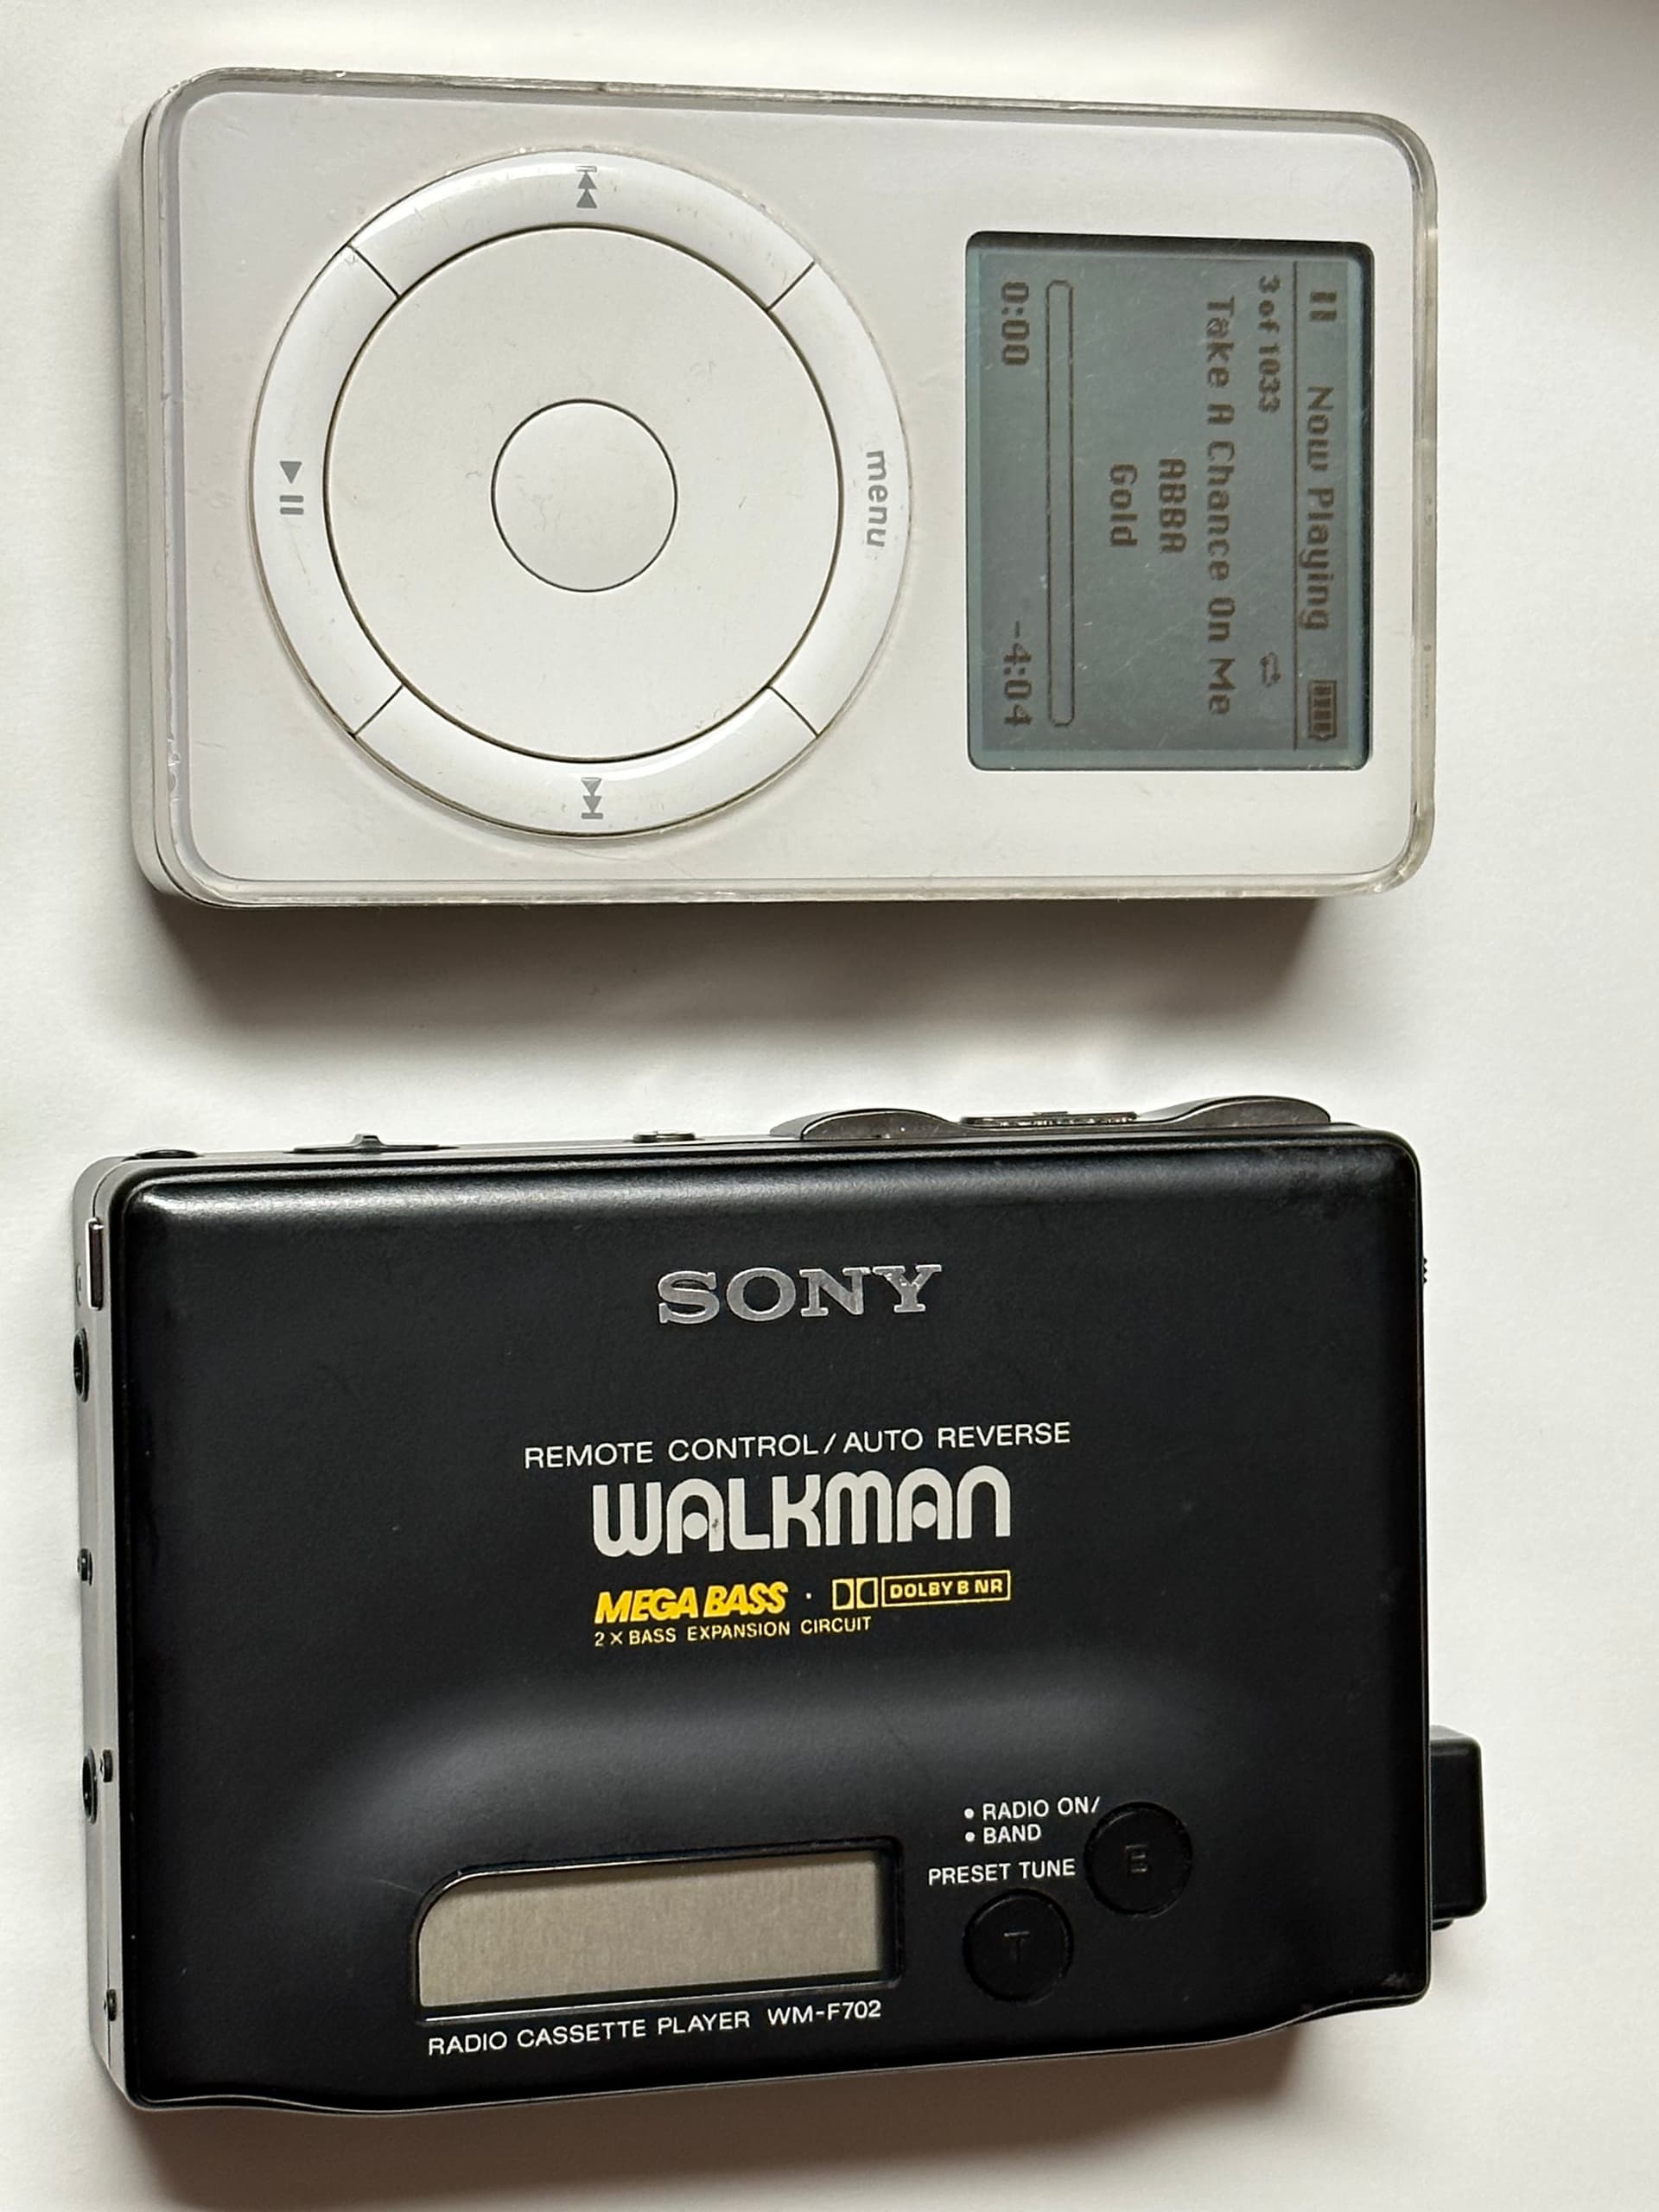 You can thank your old Sony Walkman for ushering in the era of